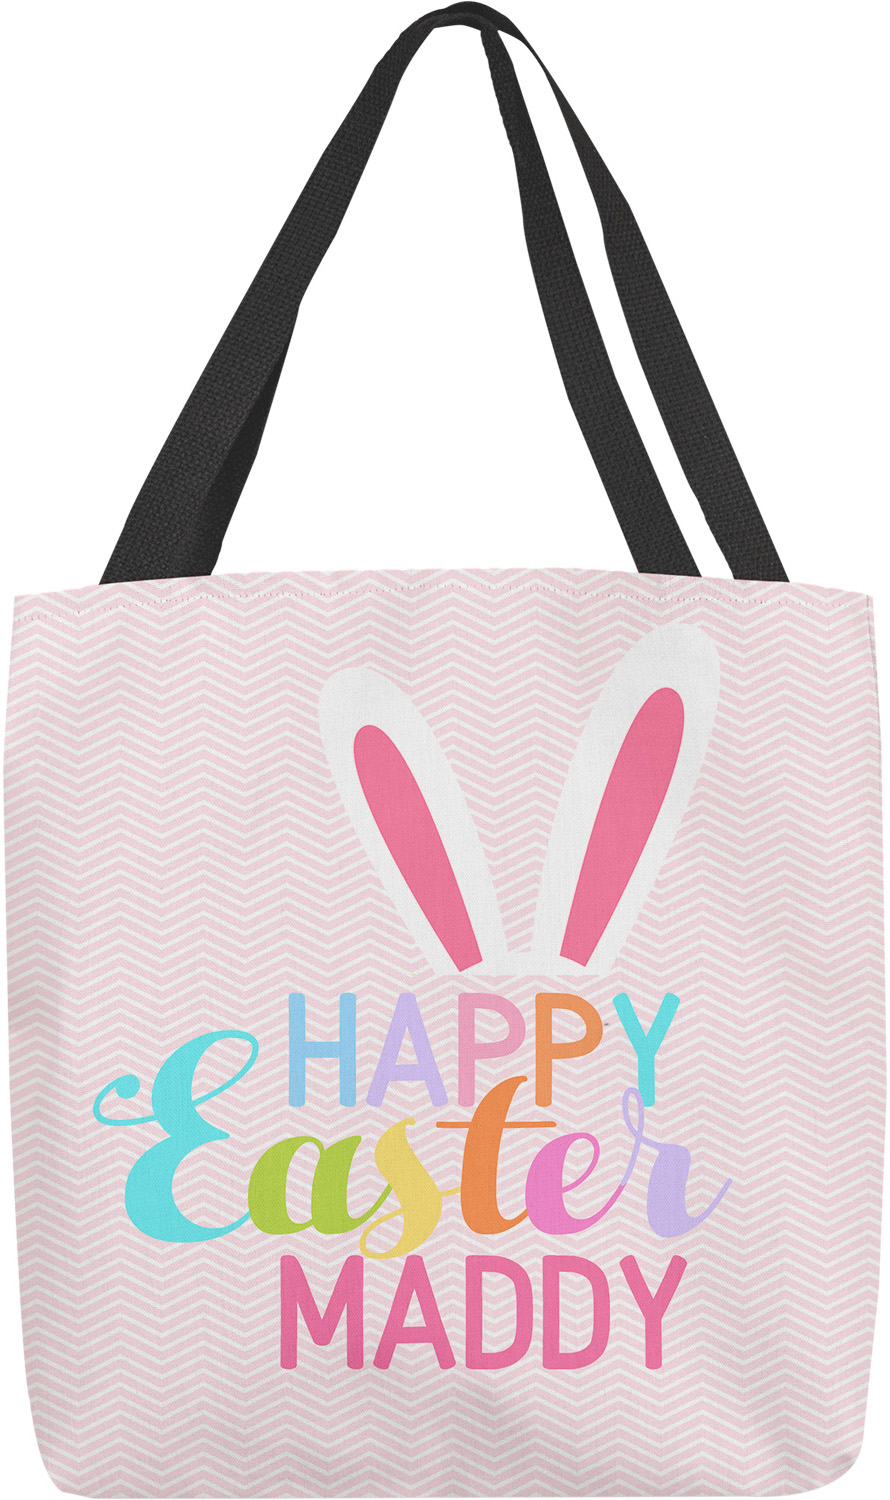 Happy Easter Eggs Personalized Gift Bags